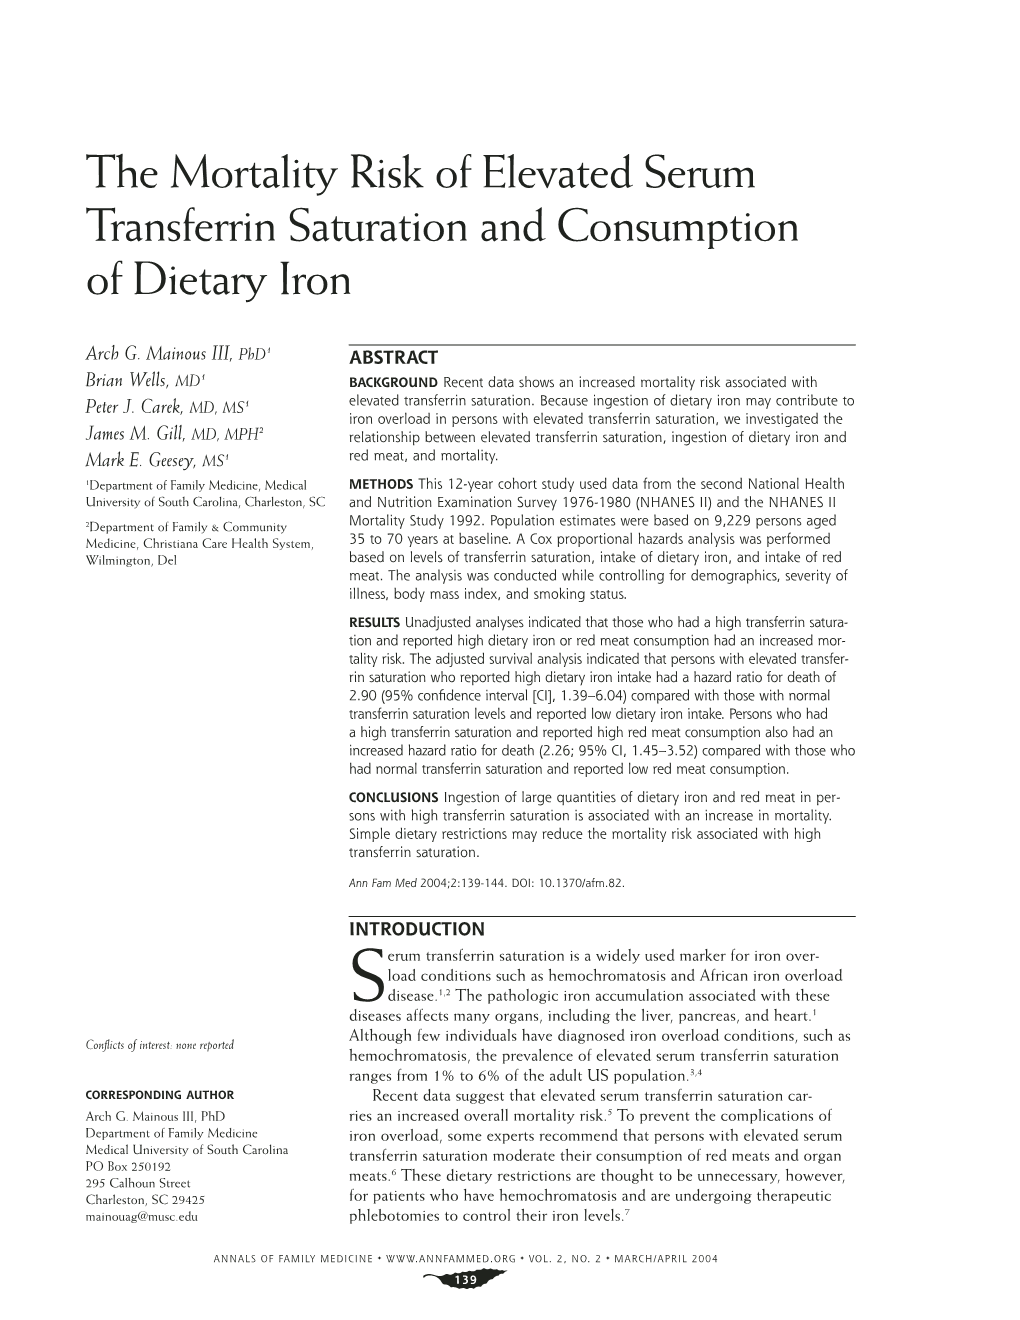 The Mortality Risk of Elevated Serum Transferrin Saturation and Consumption of Dietary Iron